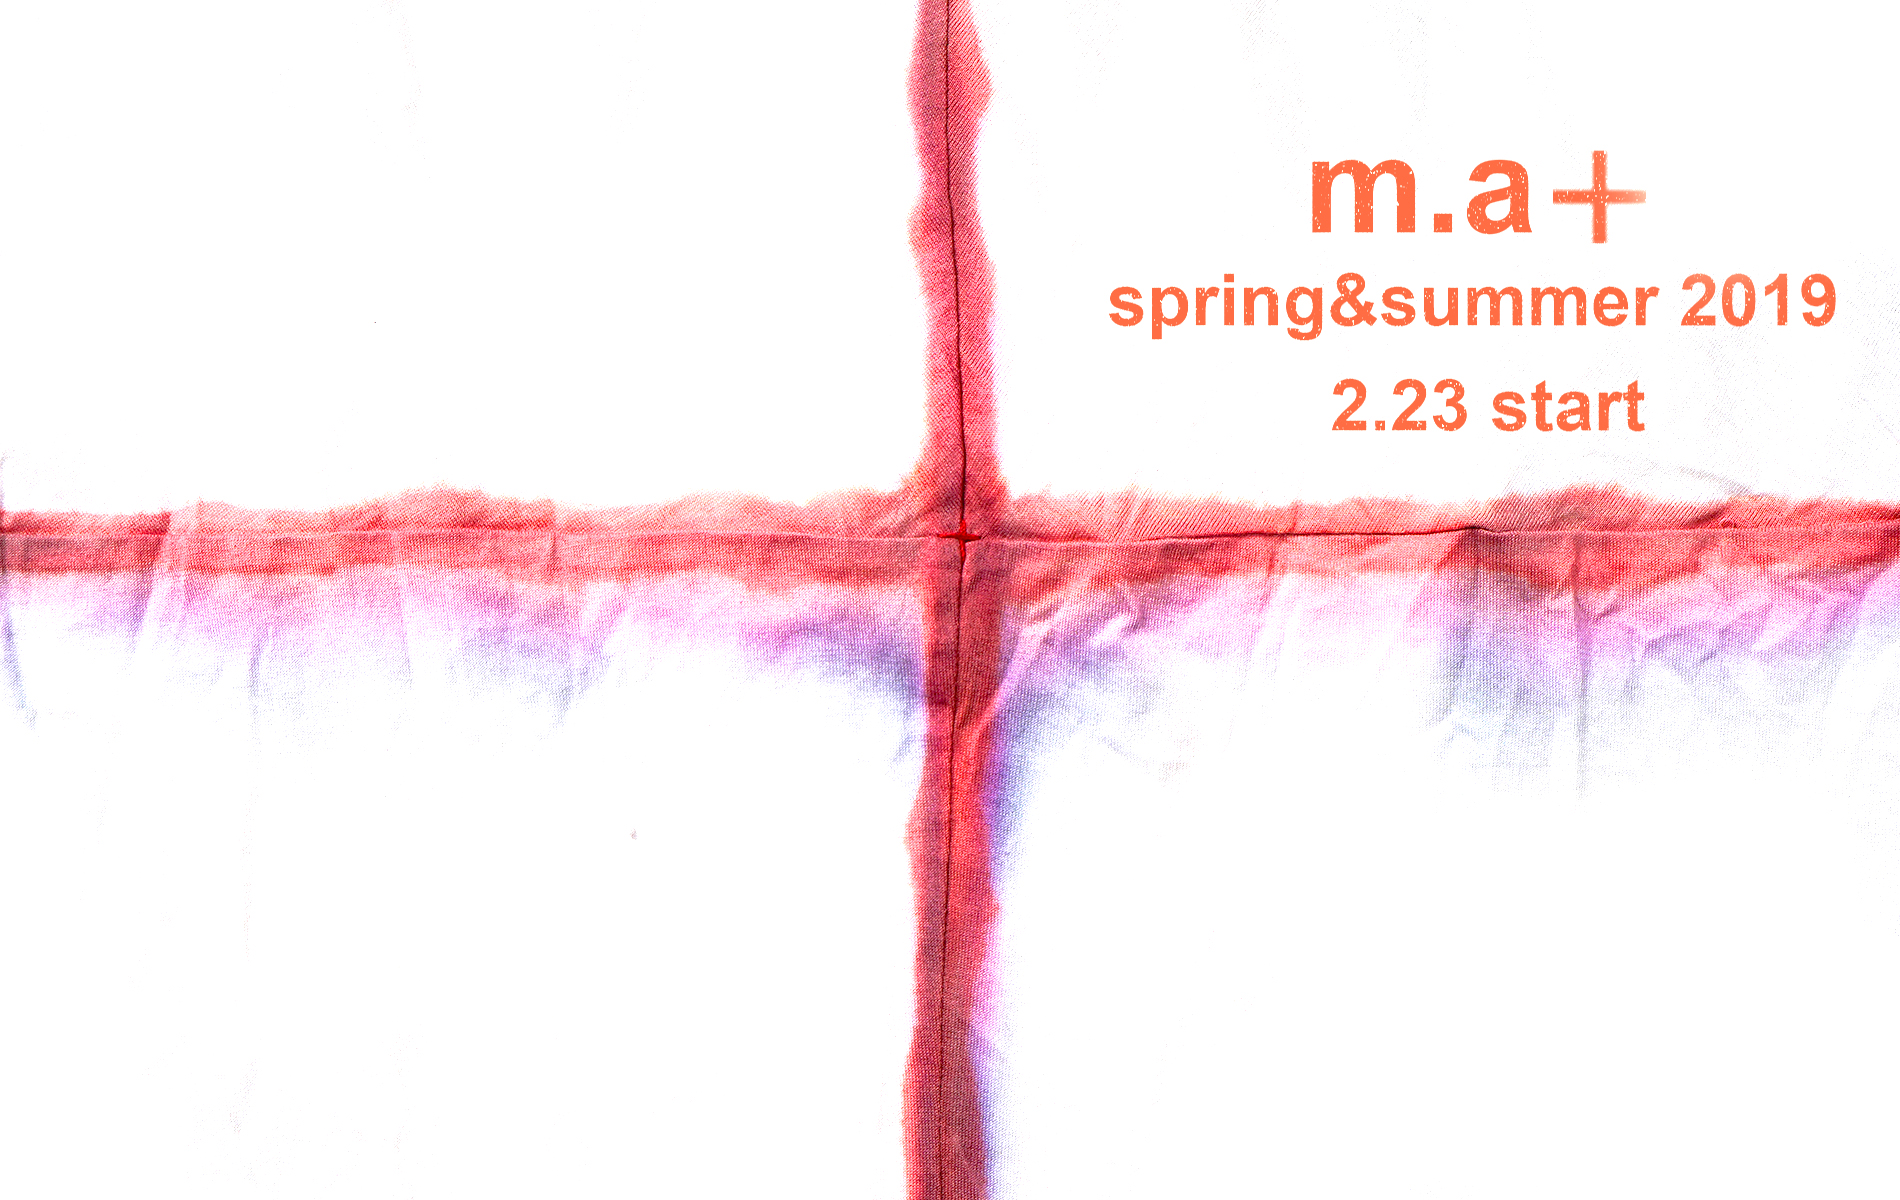 m.a+  spring&summer 2019  2.23 store release.